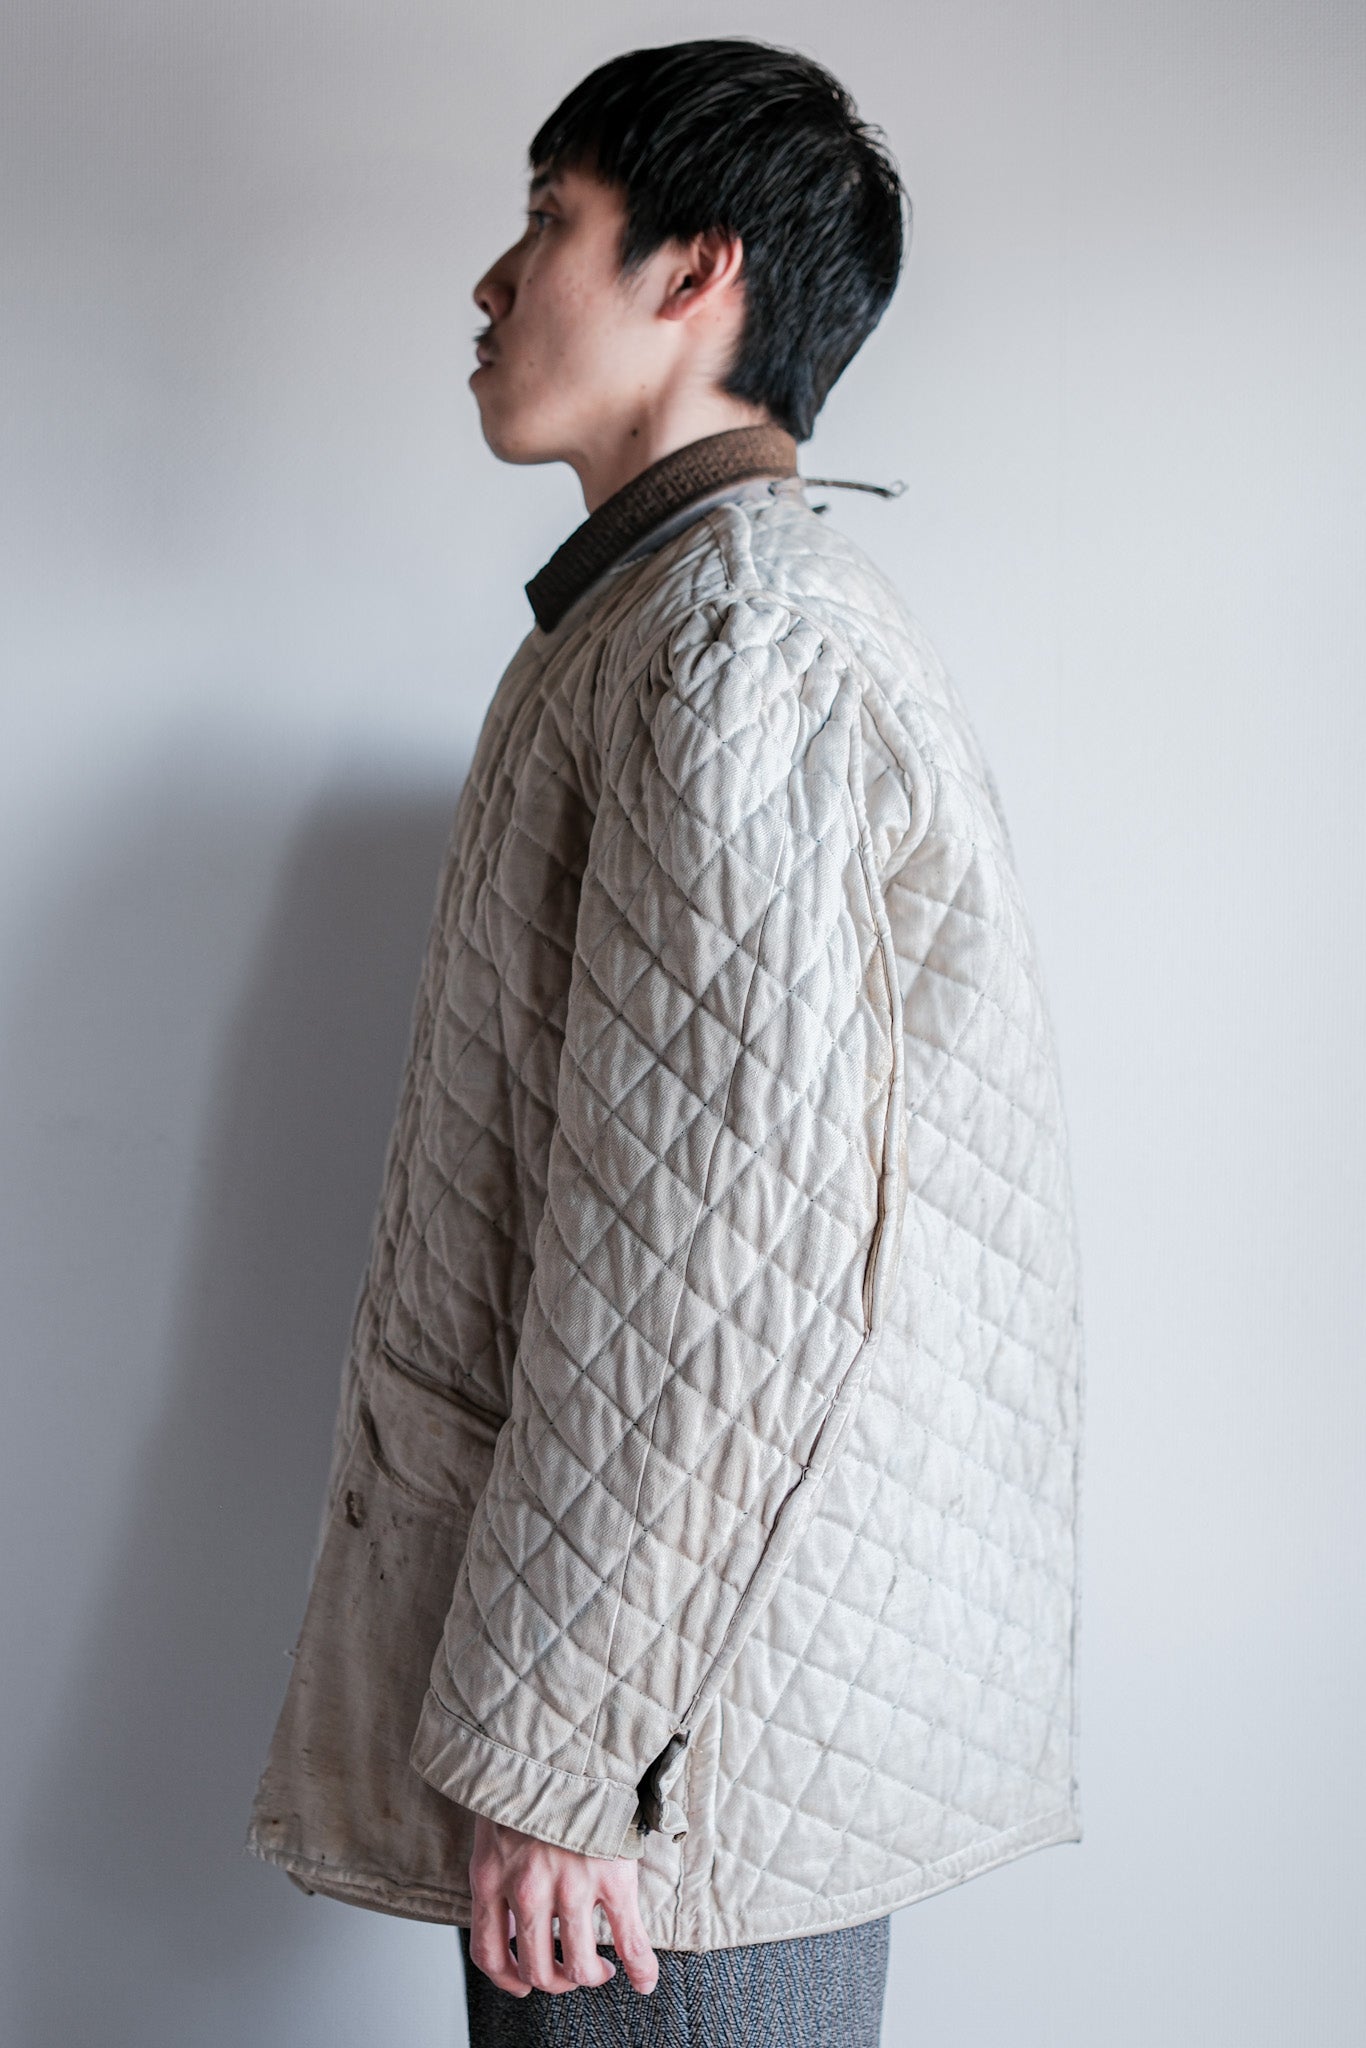 【~40's】WWⅡ German Army Gray-White Reversible Quilted Winter Parka "Modified" "Wehrmacht"